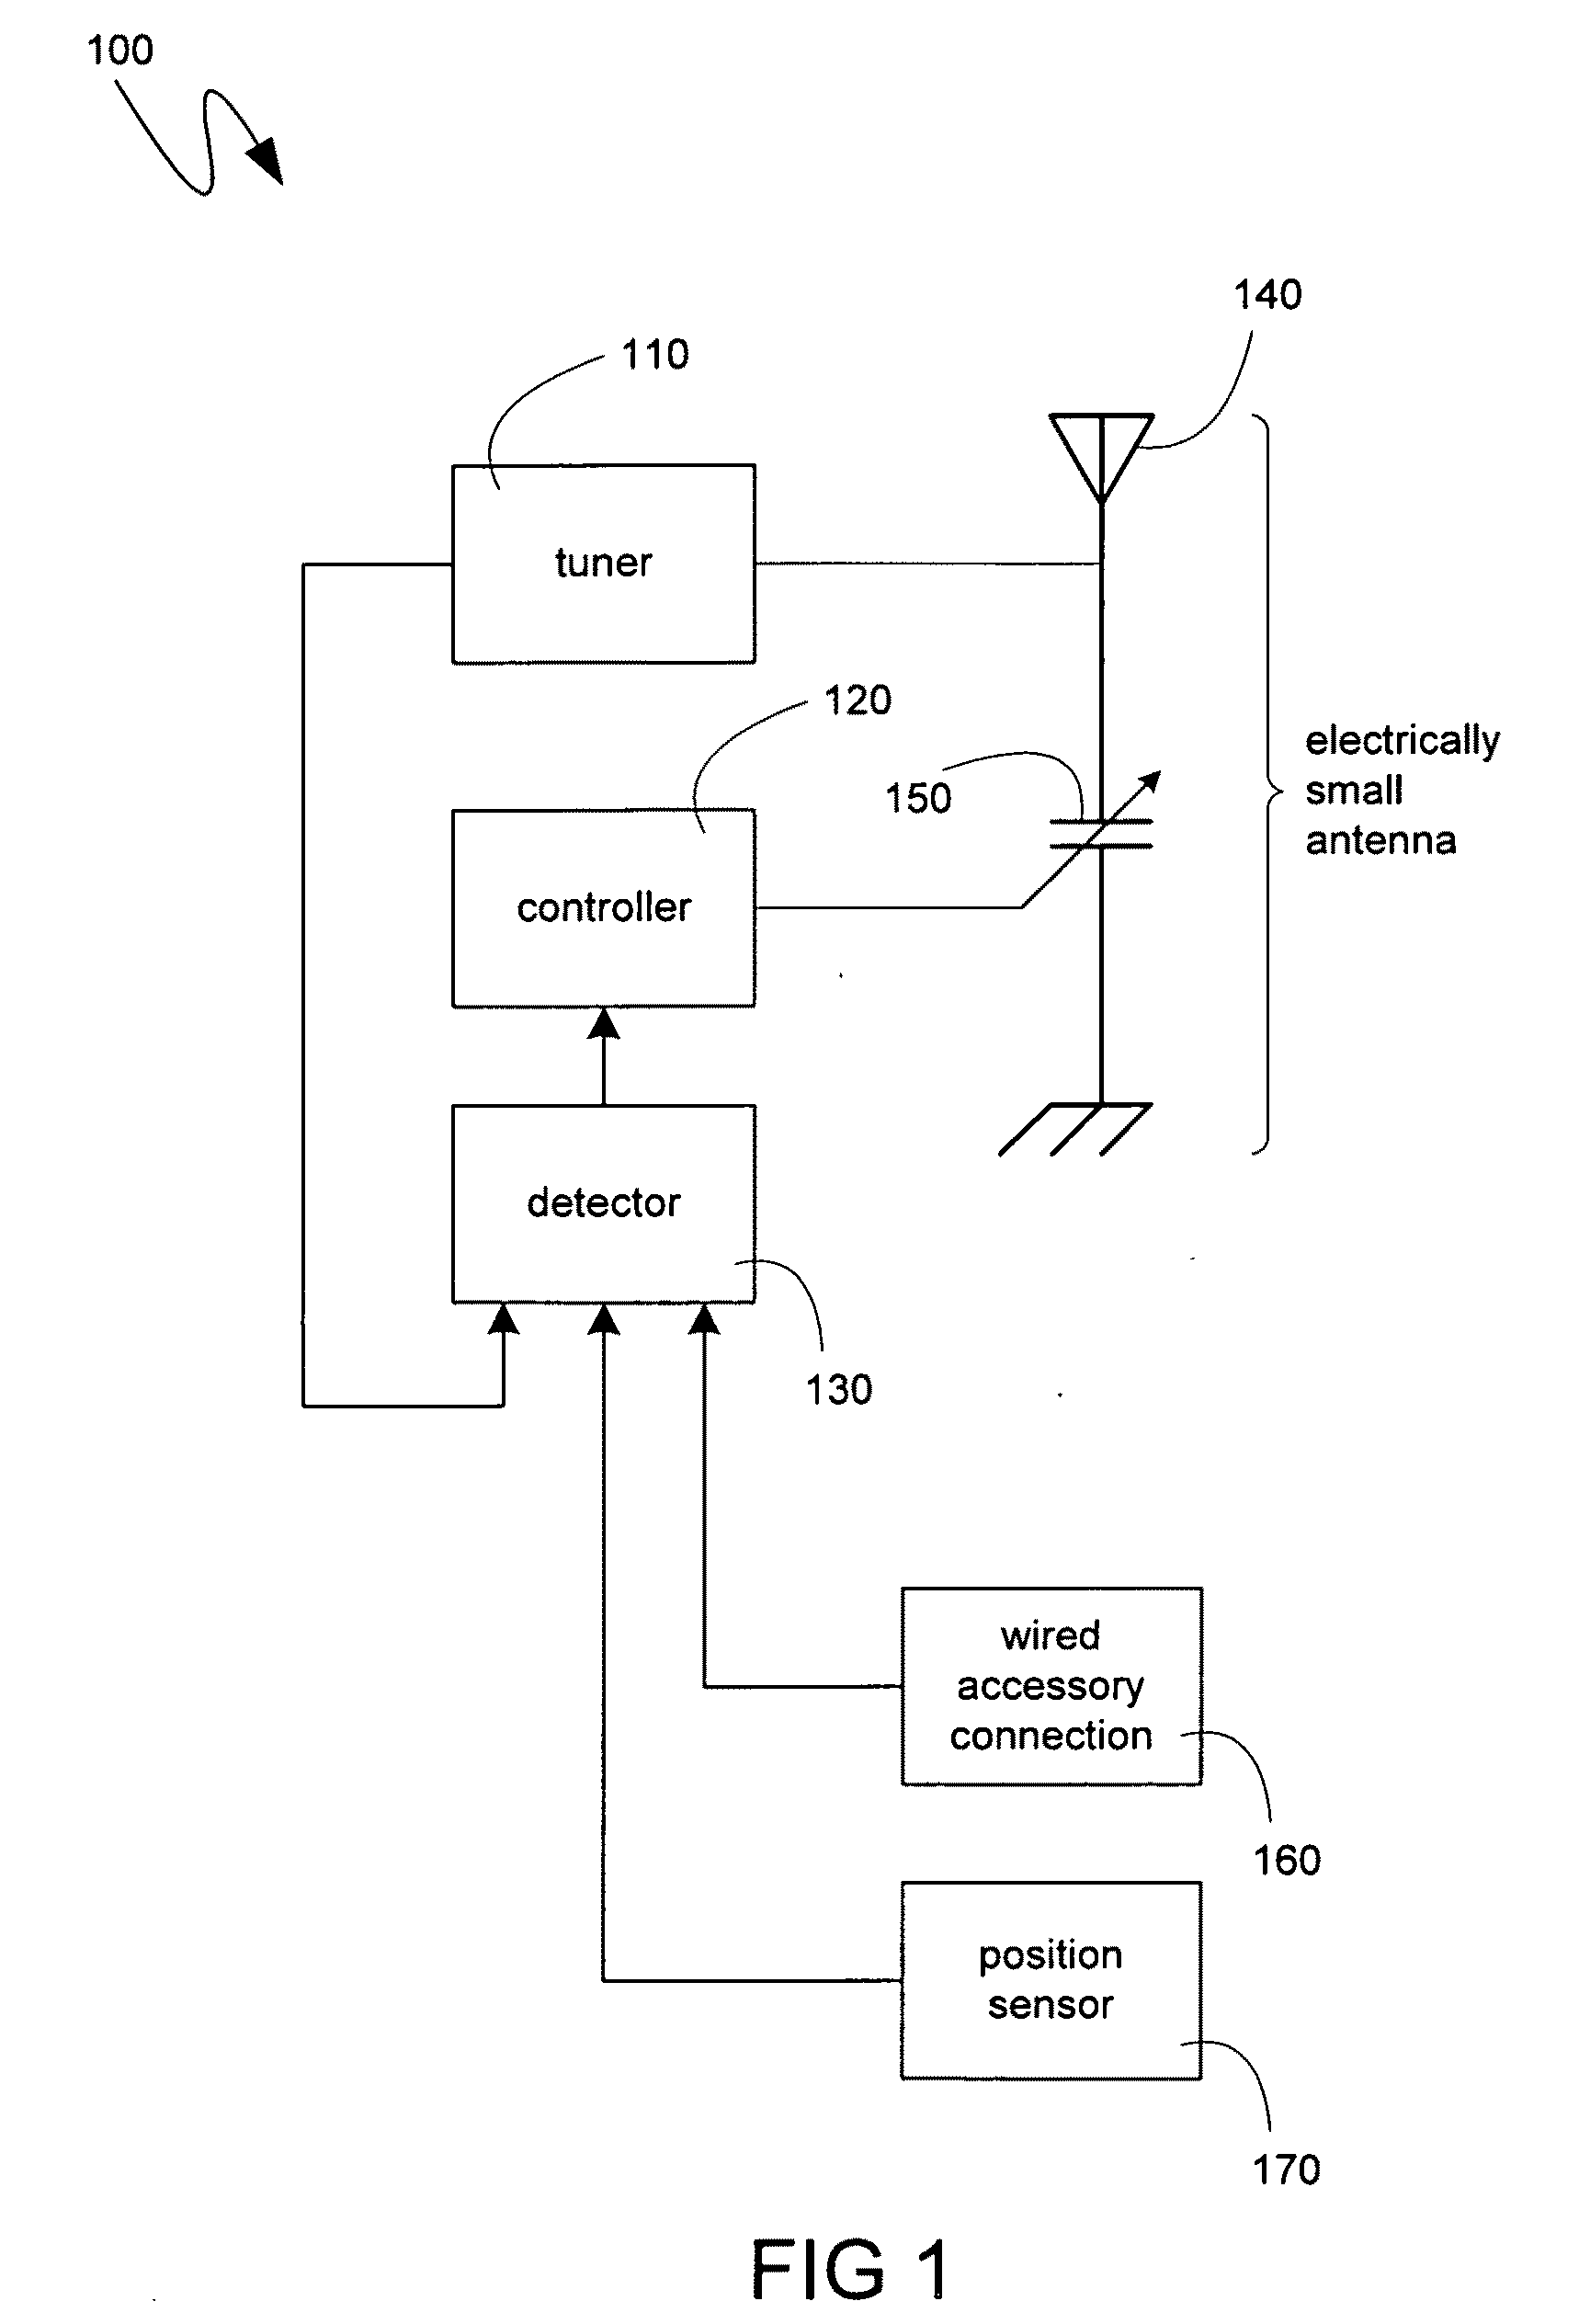 Tuning an electrically small antenna